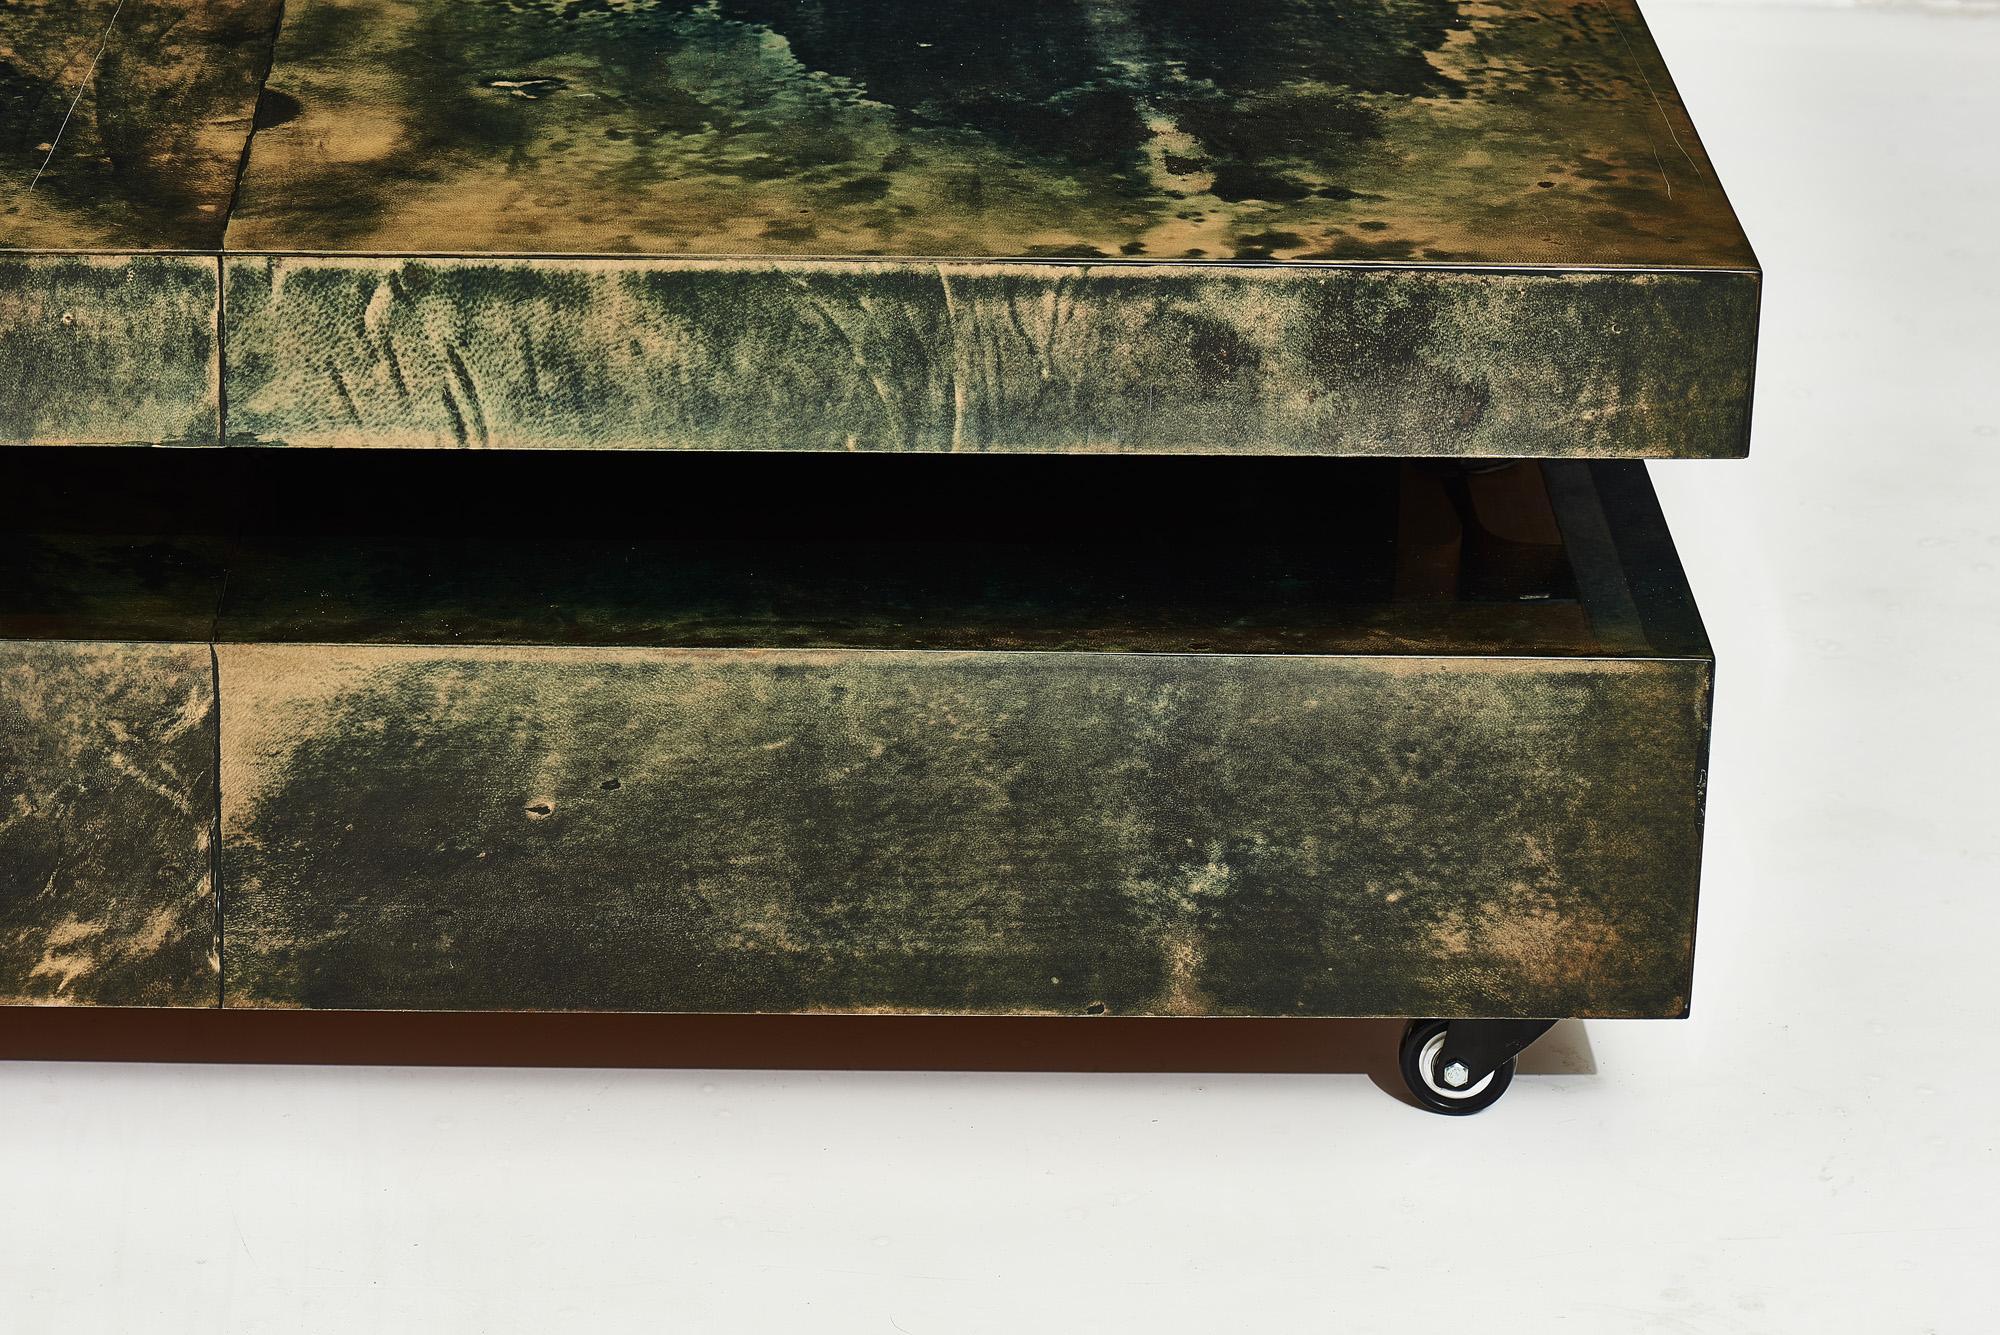 Aldo Tura green goat skin lacquered coffee table. Italy 1970. Top of table extends for additional surface/further reach.